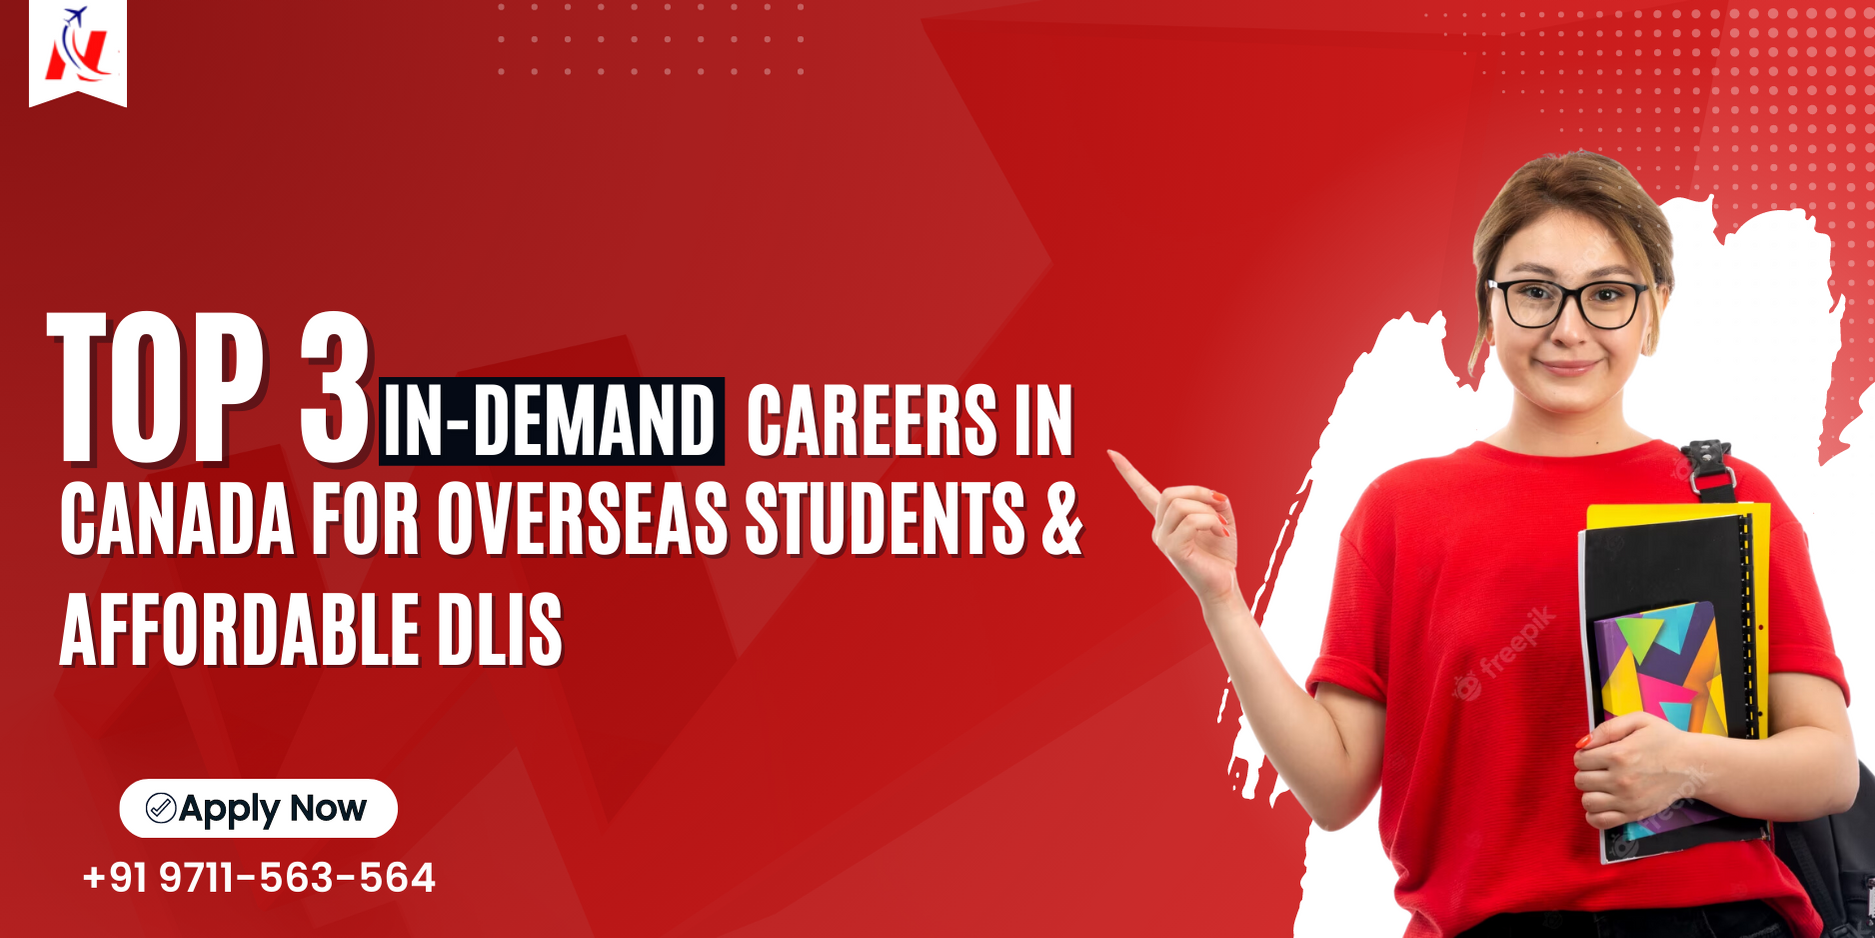 Top 3 In-Demand Careers in Canada for Overseas Students & Affordable DLIs